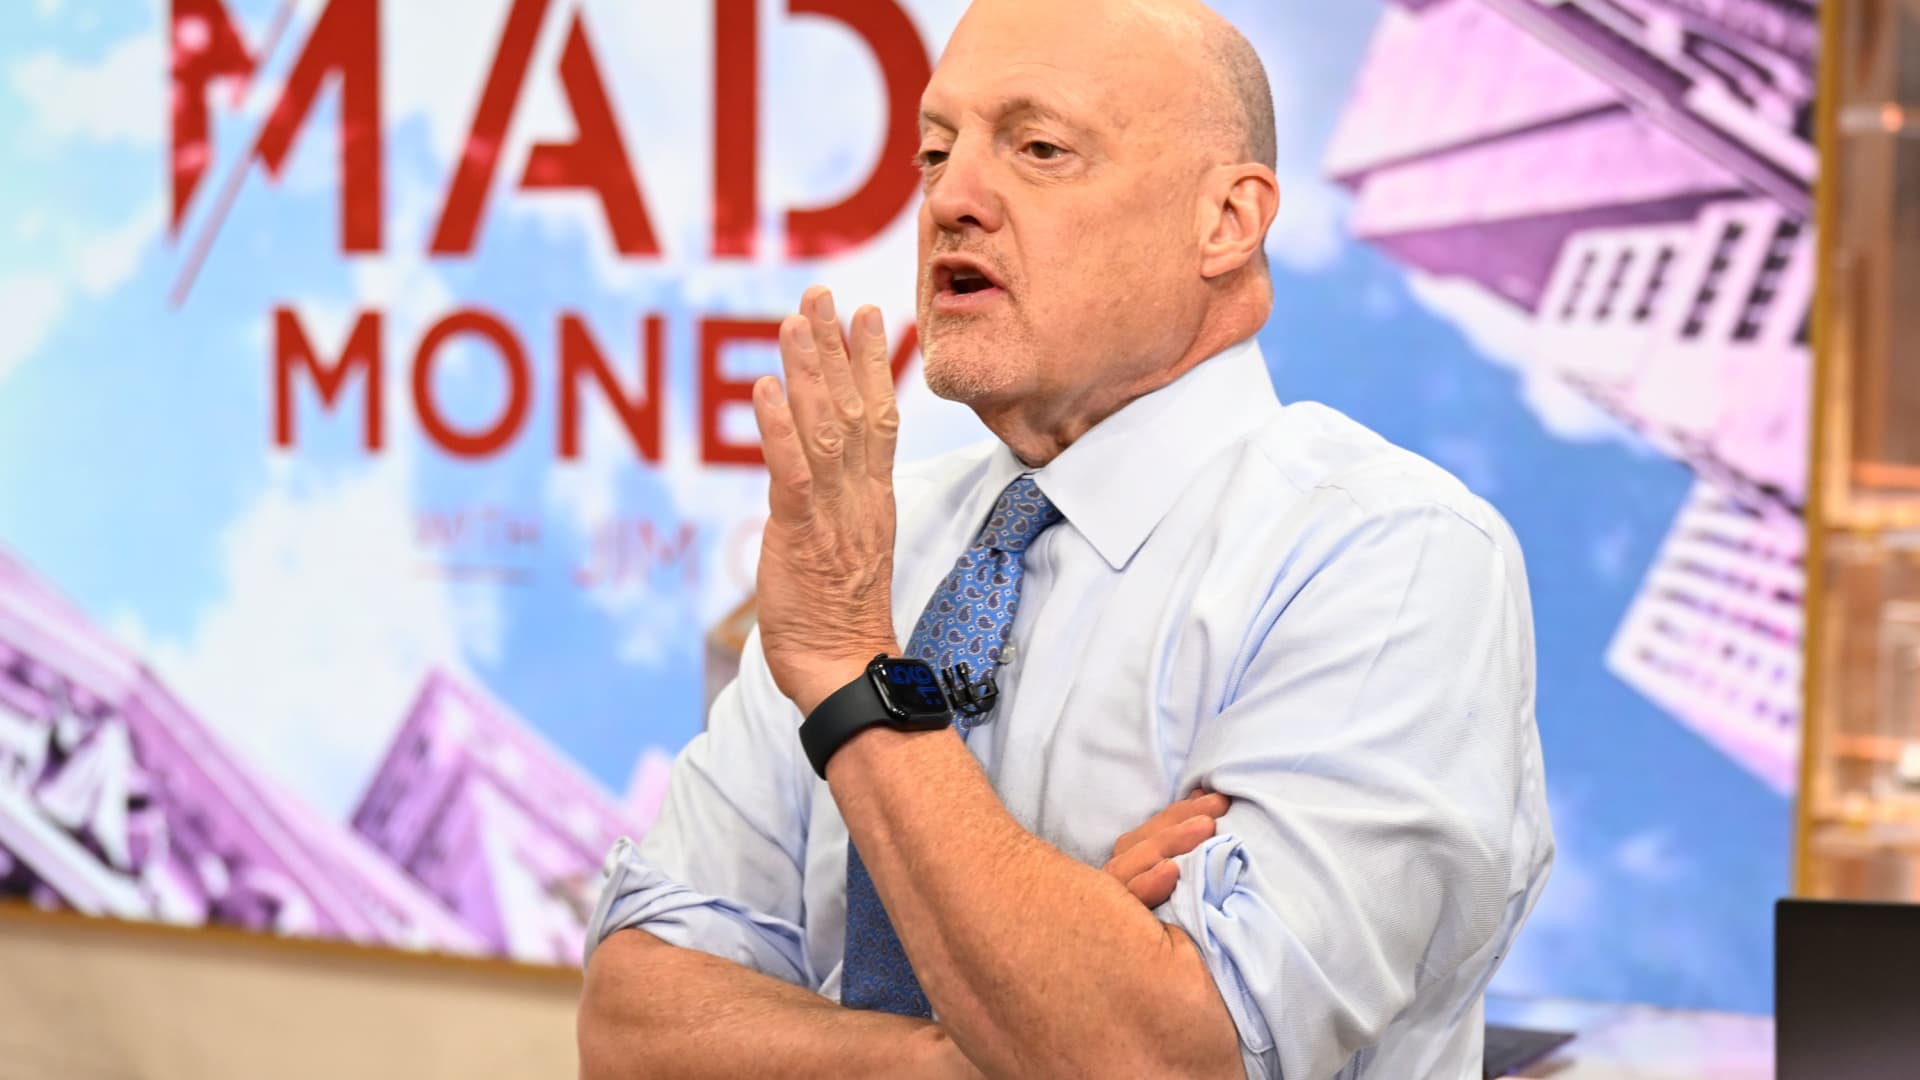 Jim Cramer expects defensive stocks to be resilient as debt ceiling talks drag on